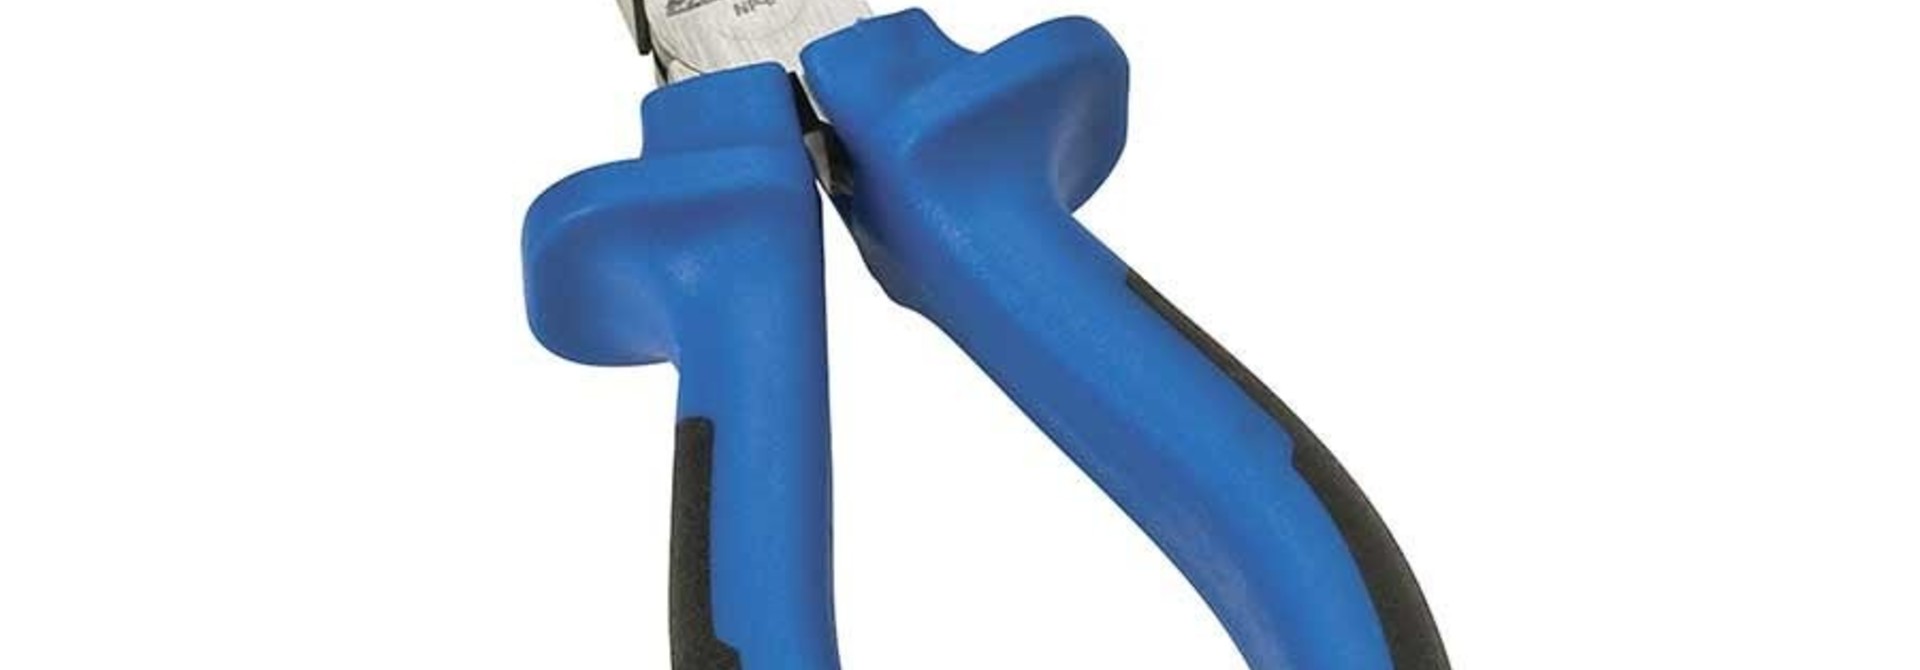 Park Tool, NP-6, Needle nose pliers